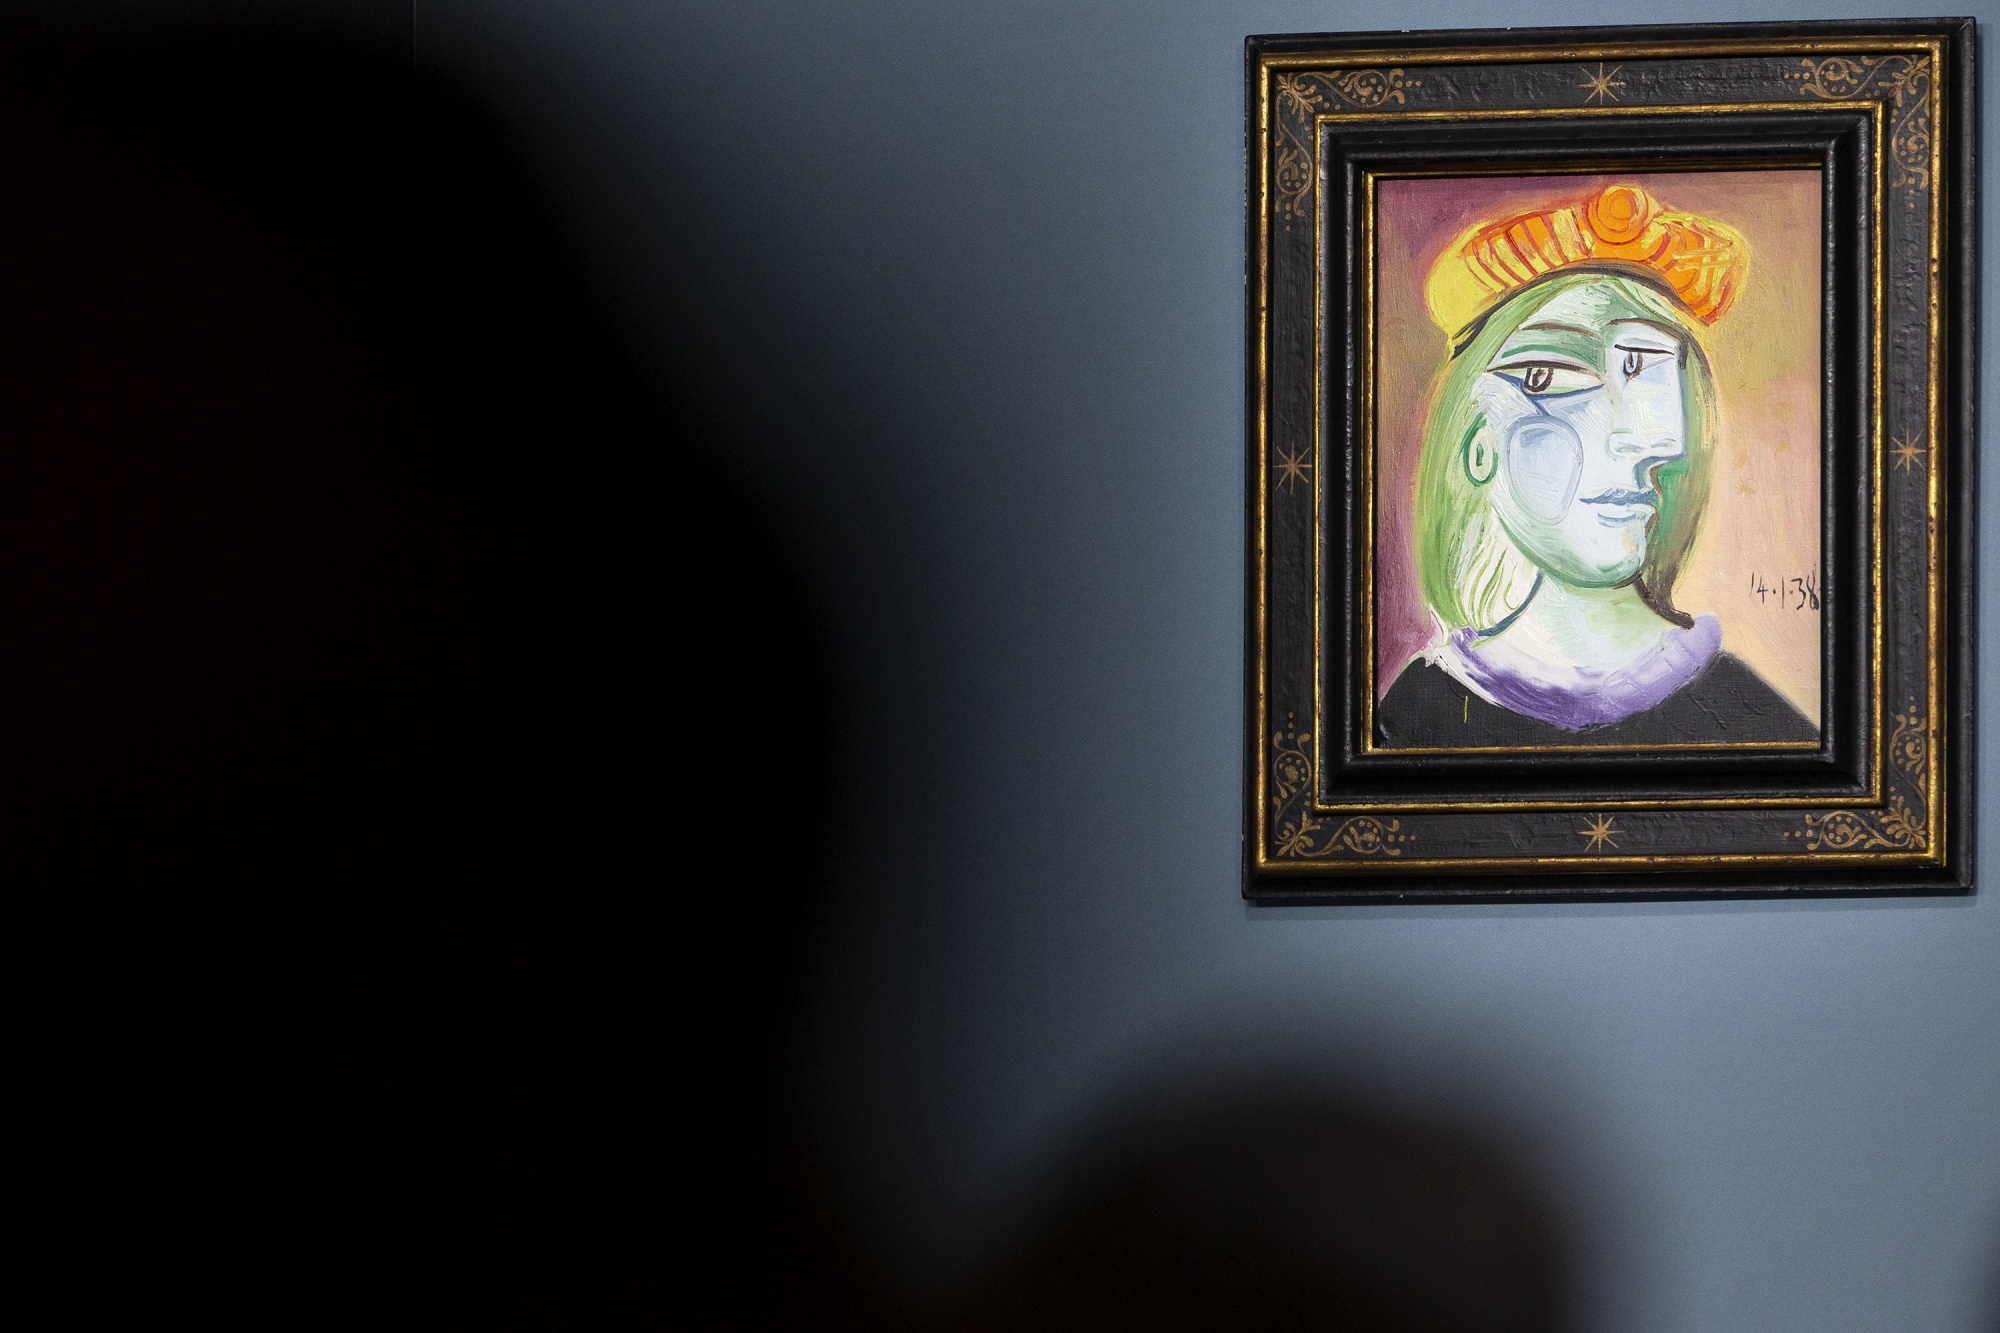 Pablo Picasso's &quot;Femme au béret rouge-orange&quot; is on display for auction at the Bellagio hotel and casino Saturday, Oct. 23, 2021, in Las Vegas. Sotheby's and the MGM Resorts Fine Art Collection hosted the auction, which raised $109 million from eleven pieces. (AP Photo/Ellen Schmidt)